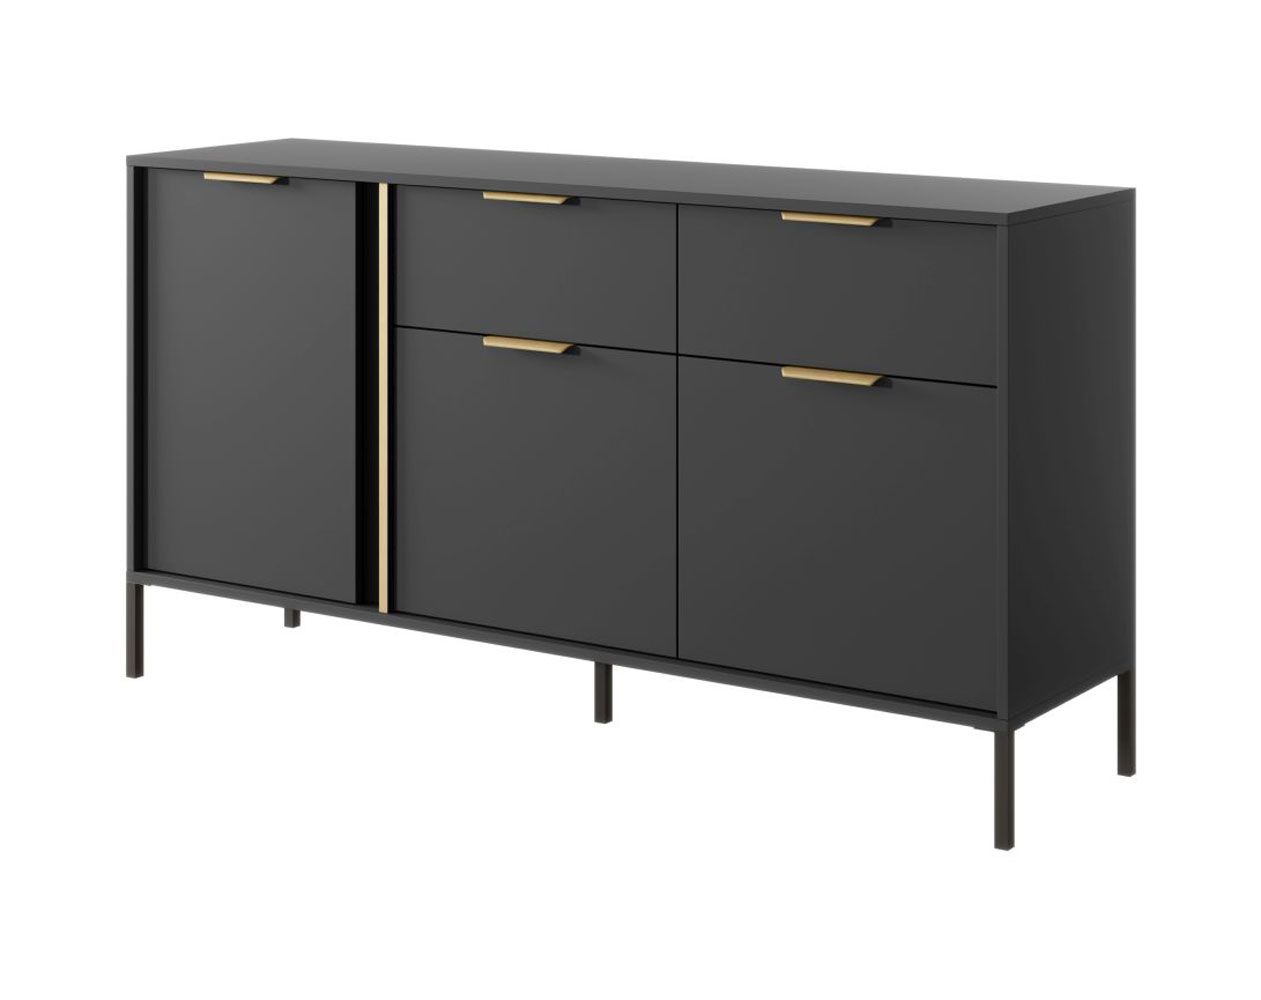 Sideboard with modern gold accents Raoued 02, color: anthracite - Dimensions: 81 x 153 x 39.5 cm (H x W x D), with three doors